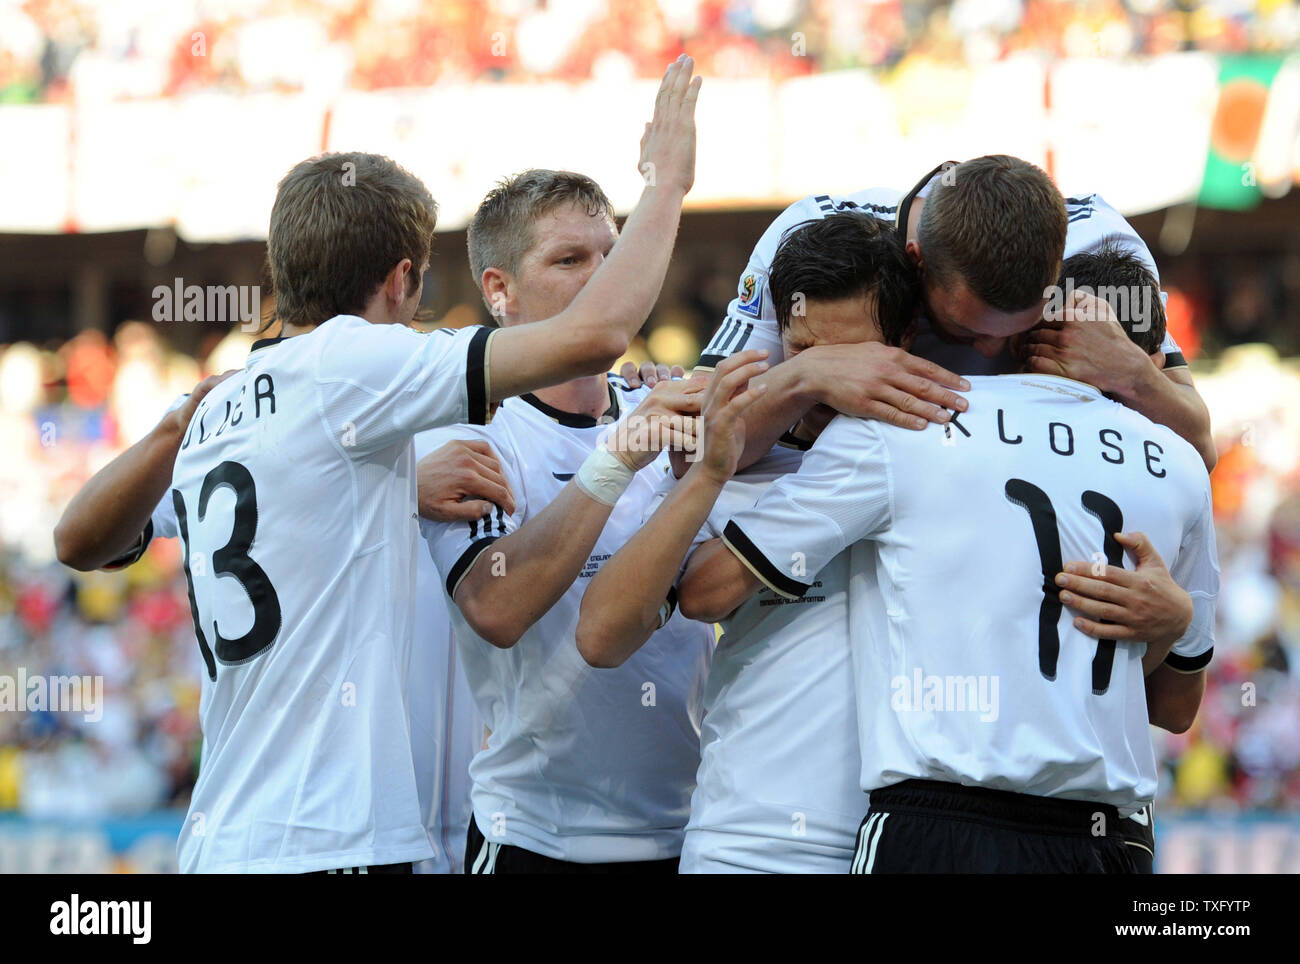 Miroslav Klose of Germany is congratulated by his team-mates after scoring the opening goal during the Round of 16 match at the Free State Stadium in Bloemfontein, South Africa on June 27, 2010. UPI/Chris Brunskill Stock Photo